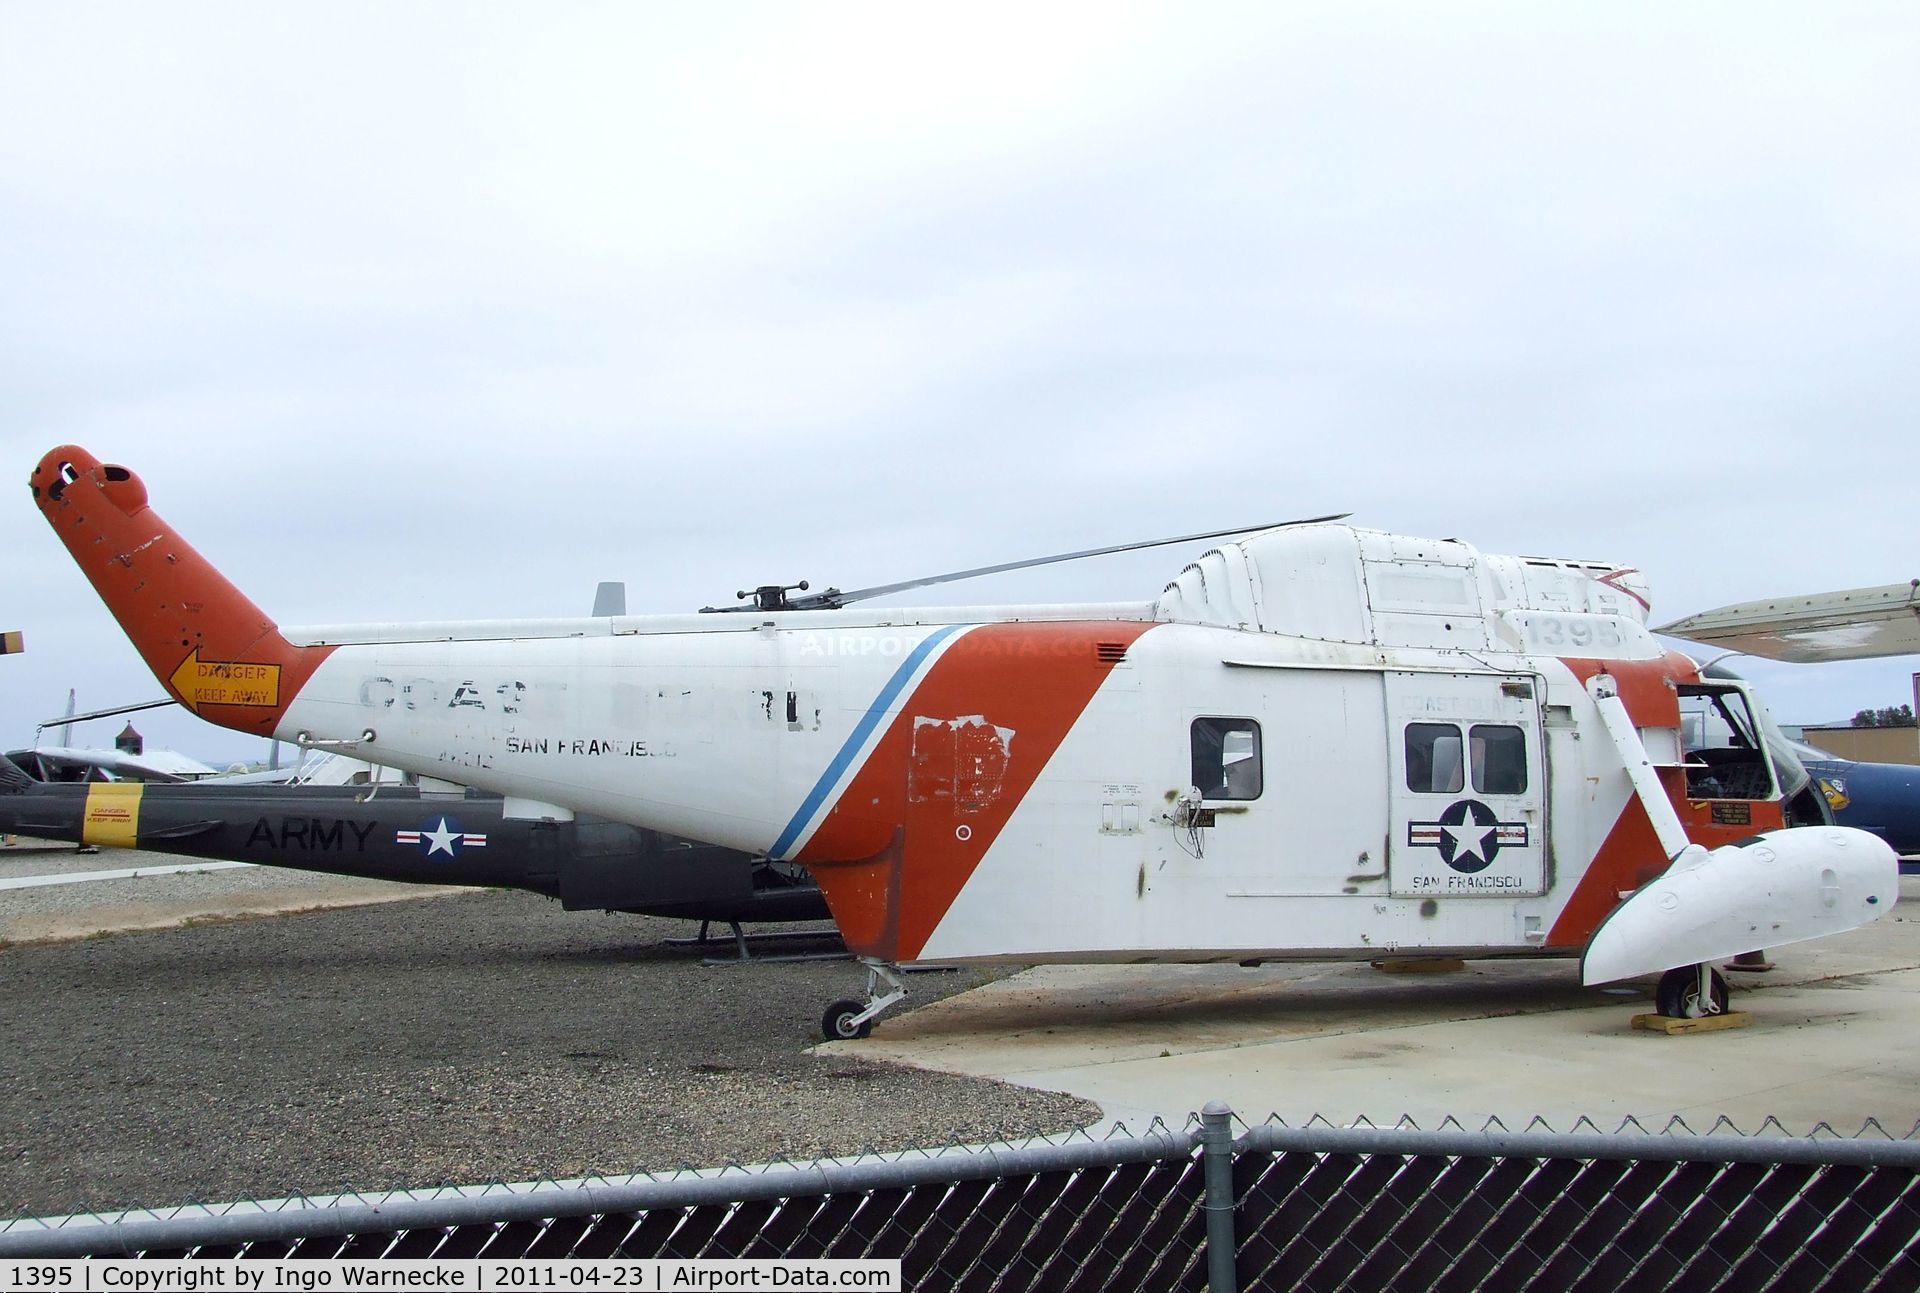 1395, Sikorsky HH-52A Sea Guard C/N 62.076, Sikorsky HH-52A Sea Guardian, being restored at the Estrella Warbirds Museum, Paso Robles CA